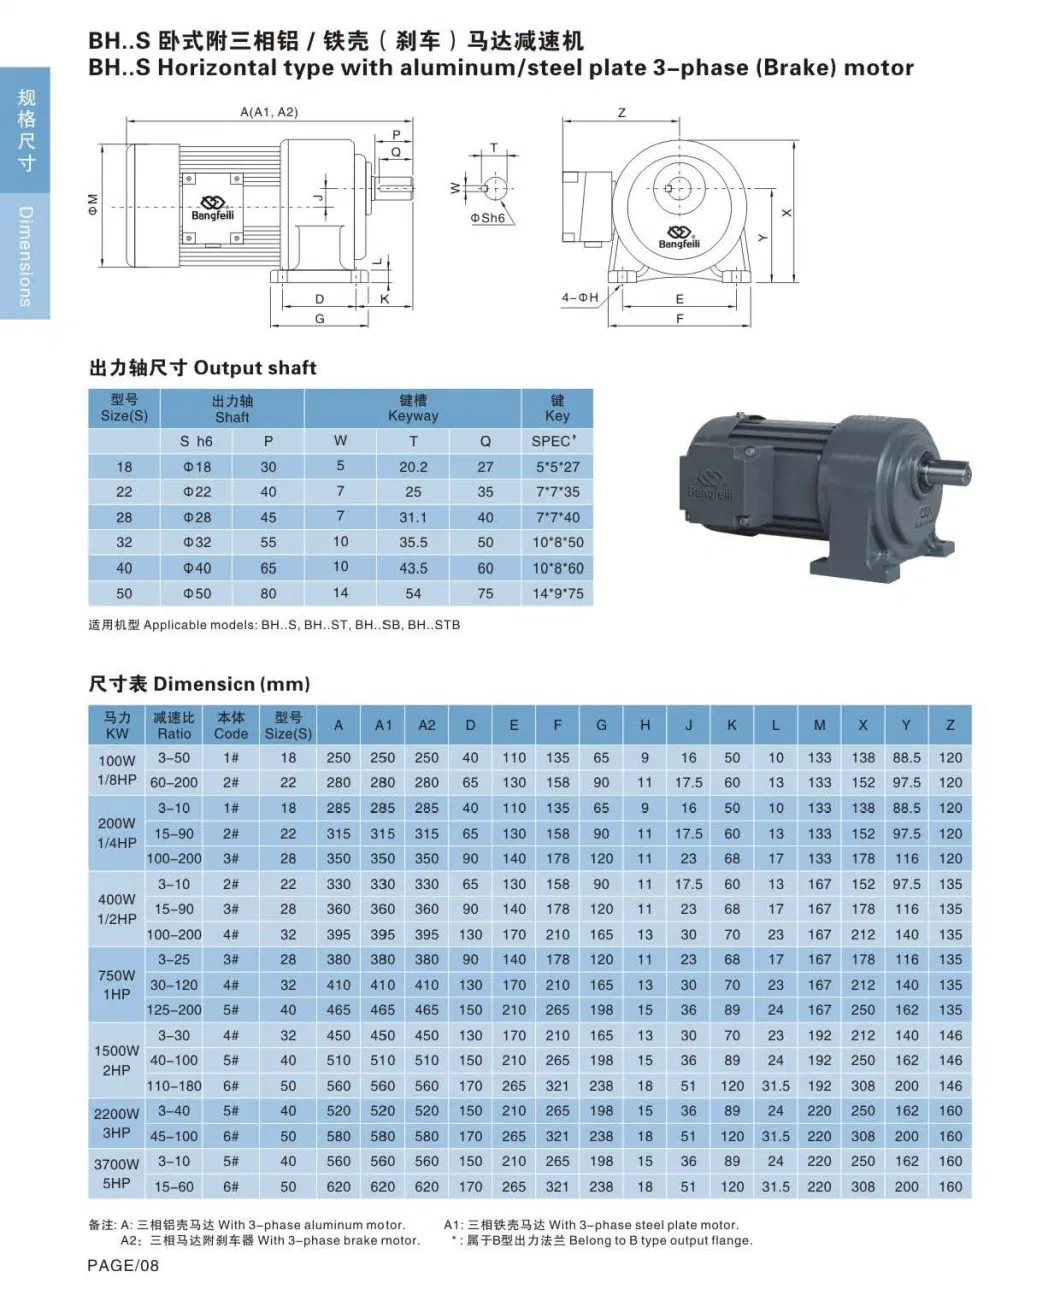 Geared Motor for Mechanical Part of Packing Machine